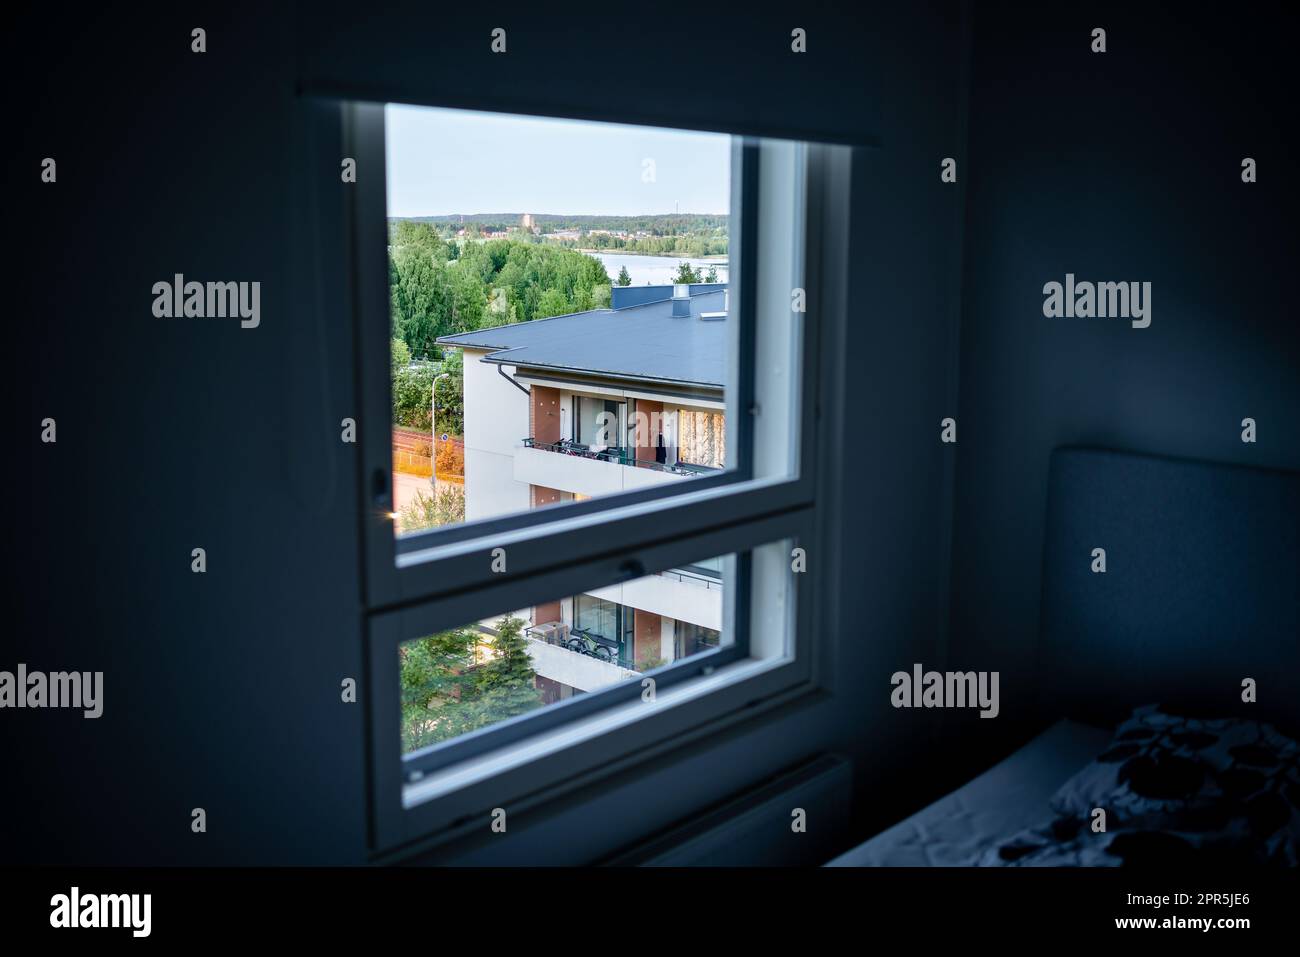 Window in apartment. Condo building house outside, neighbor. Dark room. Rental housing or real estate property. Street in residential area. Stock Photo